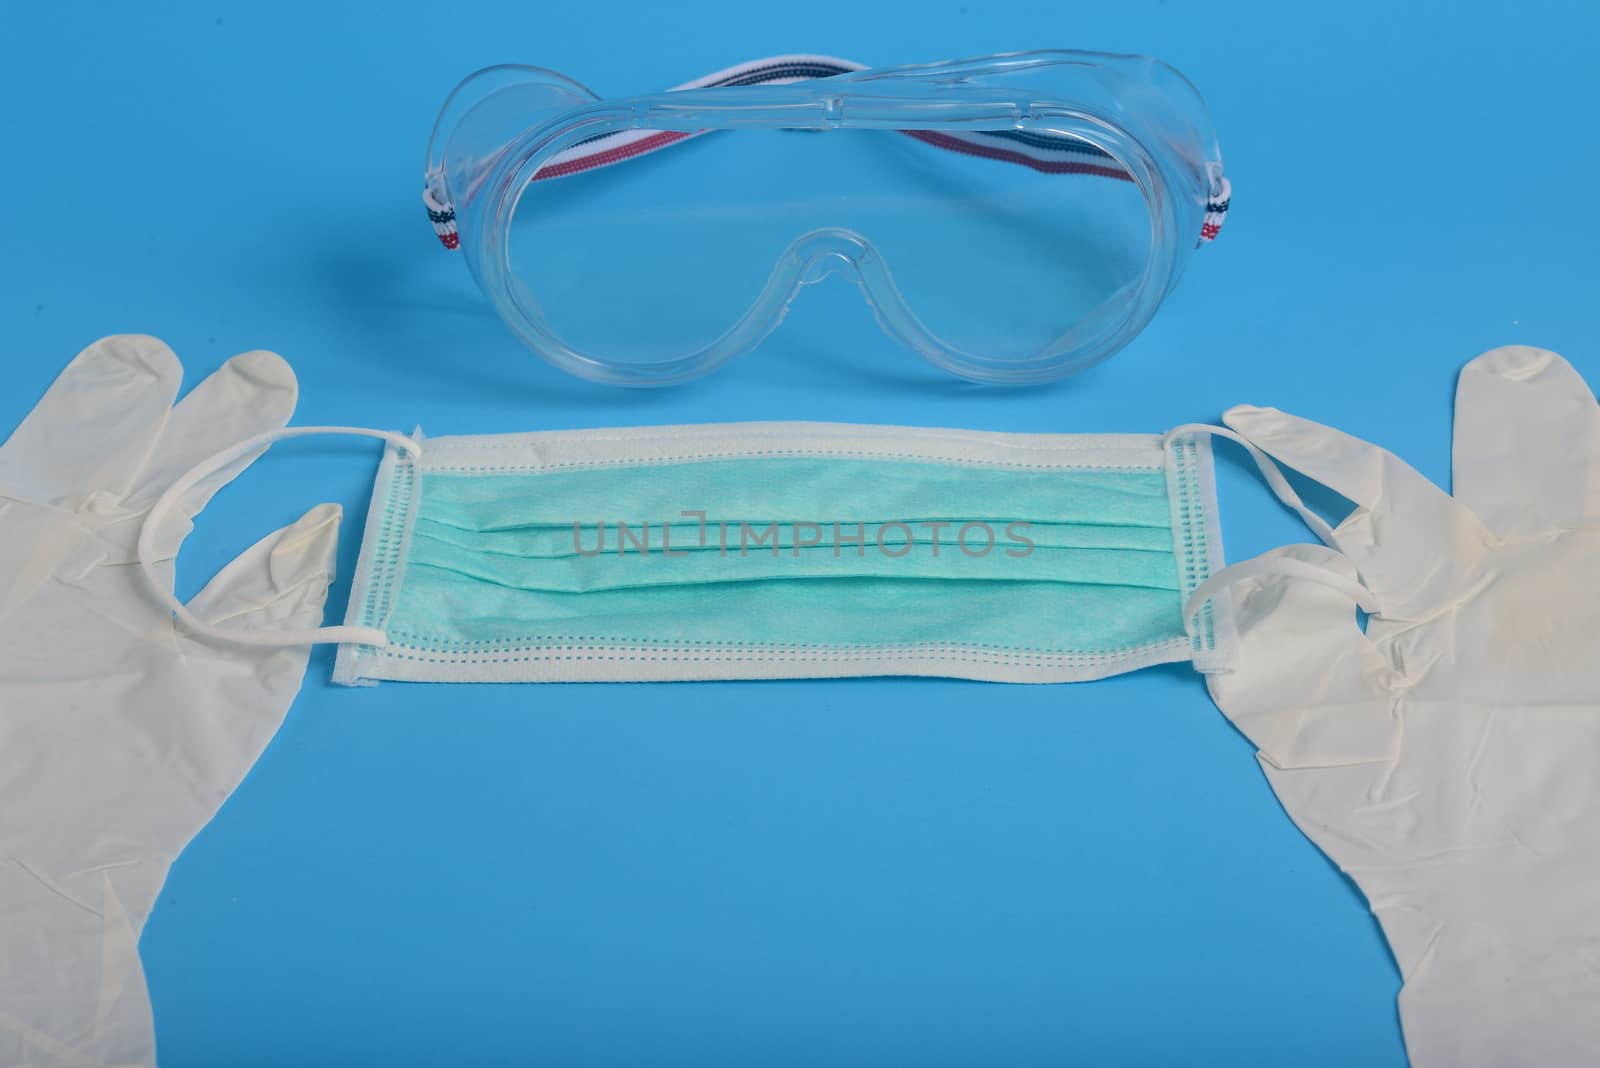 Disposable Hygienic Mask to cover the mouth and nose, transparent plastic laboratory glasses, glove latex hand examination, Protection concept covid-19 by ideation90